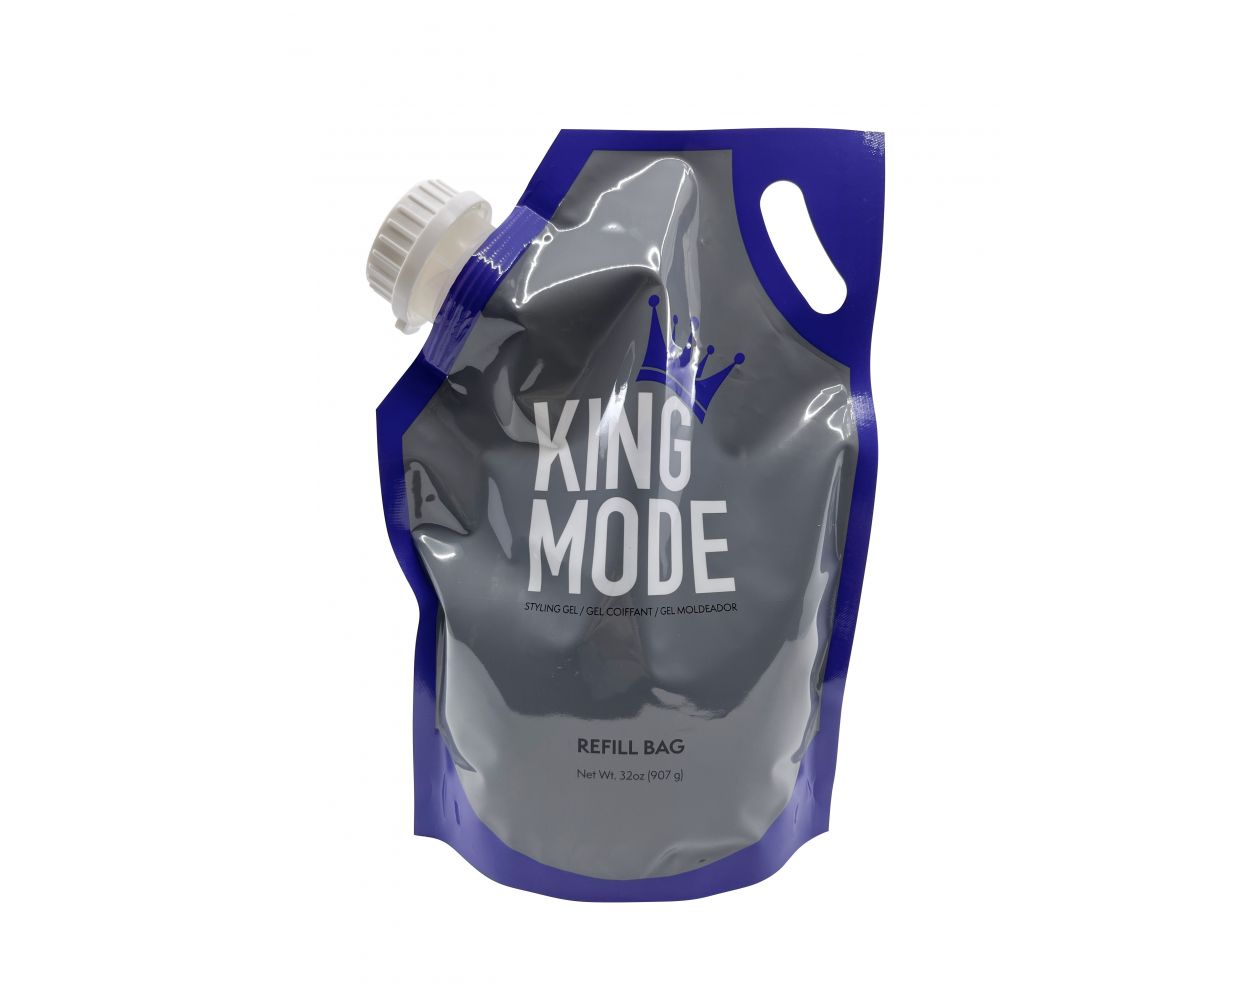 Johnny B Mode Styling Gel 32 oz/907 g Ingredients and Reviews